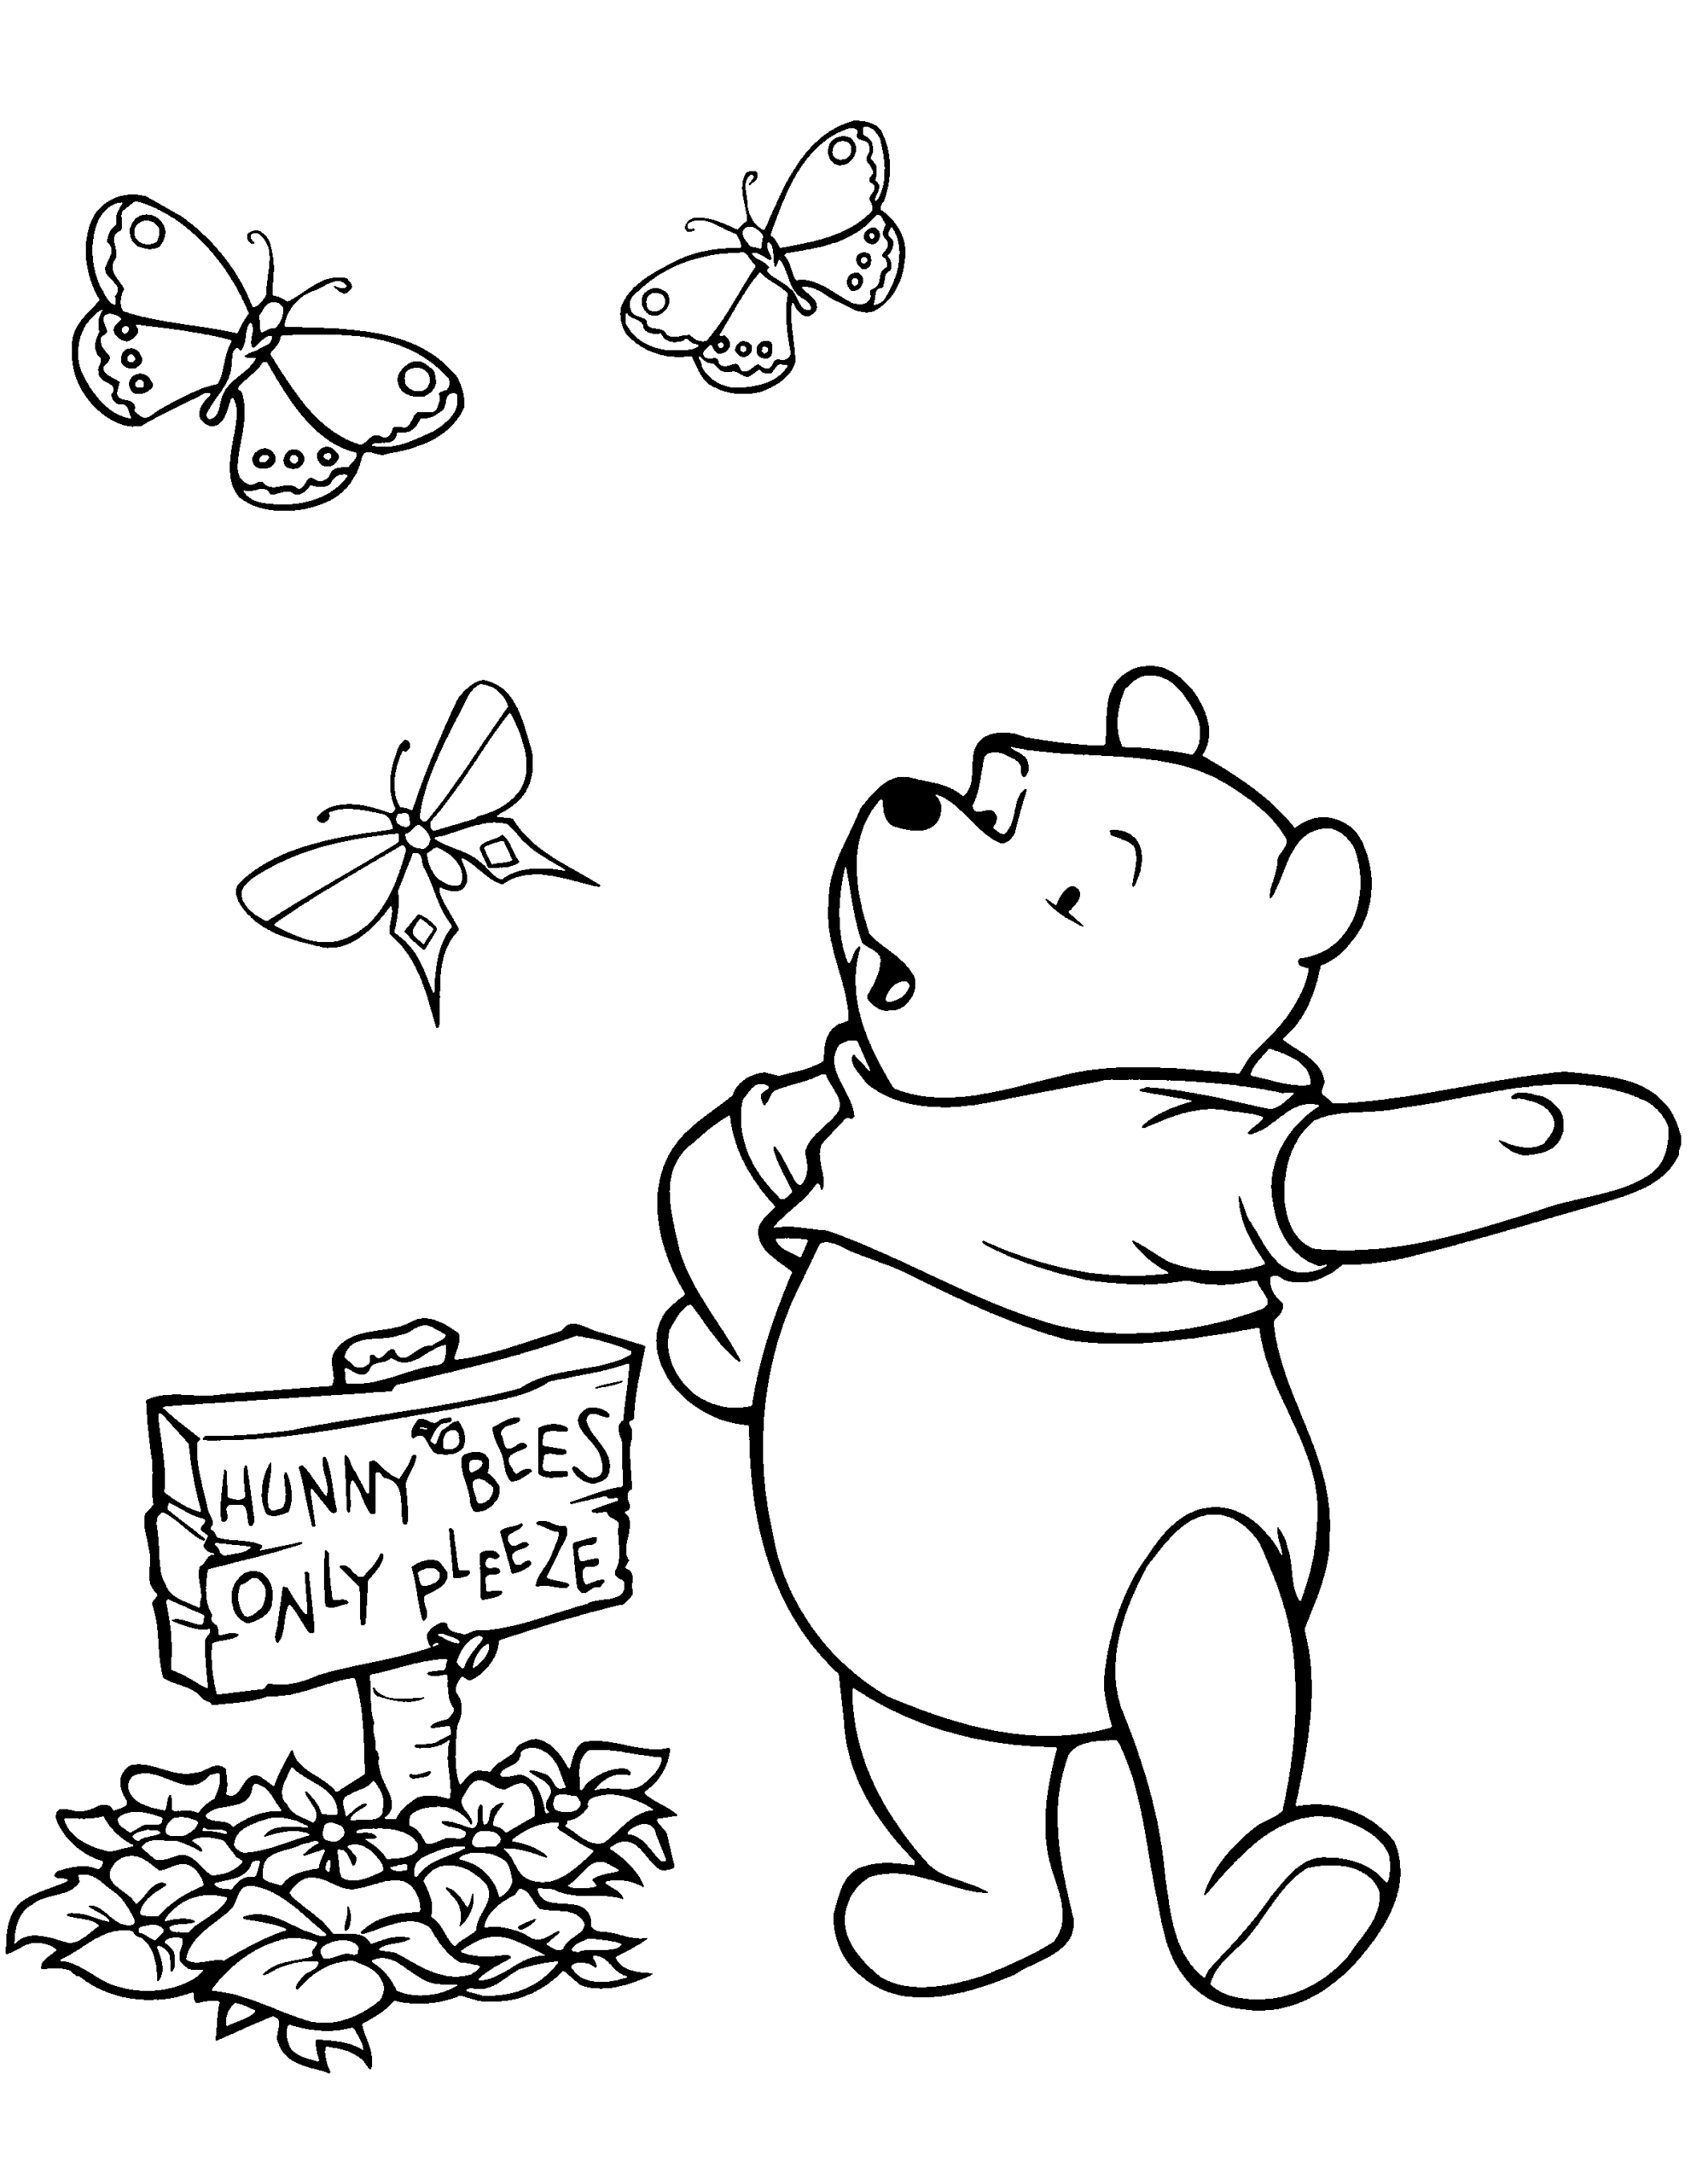 Winnie the Pooh Coloring Pages Cartoons winnie the pooh 68 Printable 2020 7185 Coloring4free